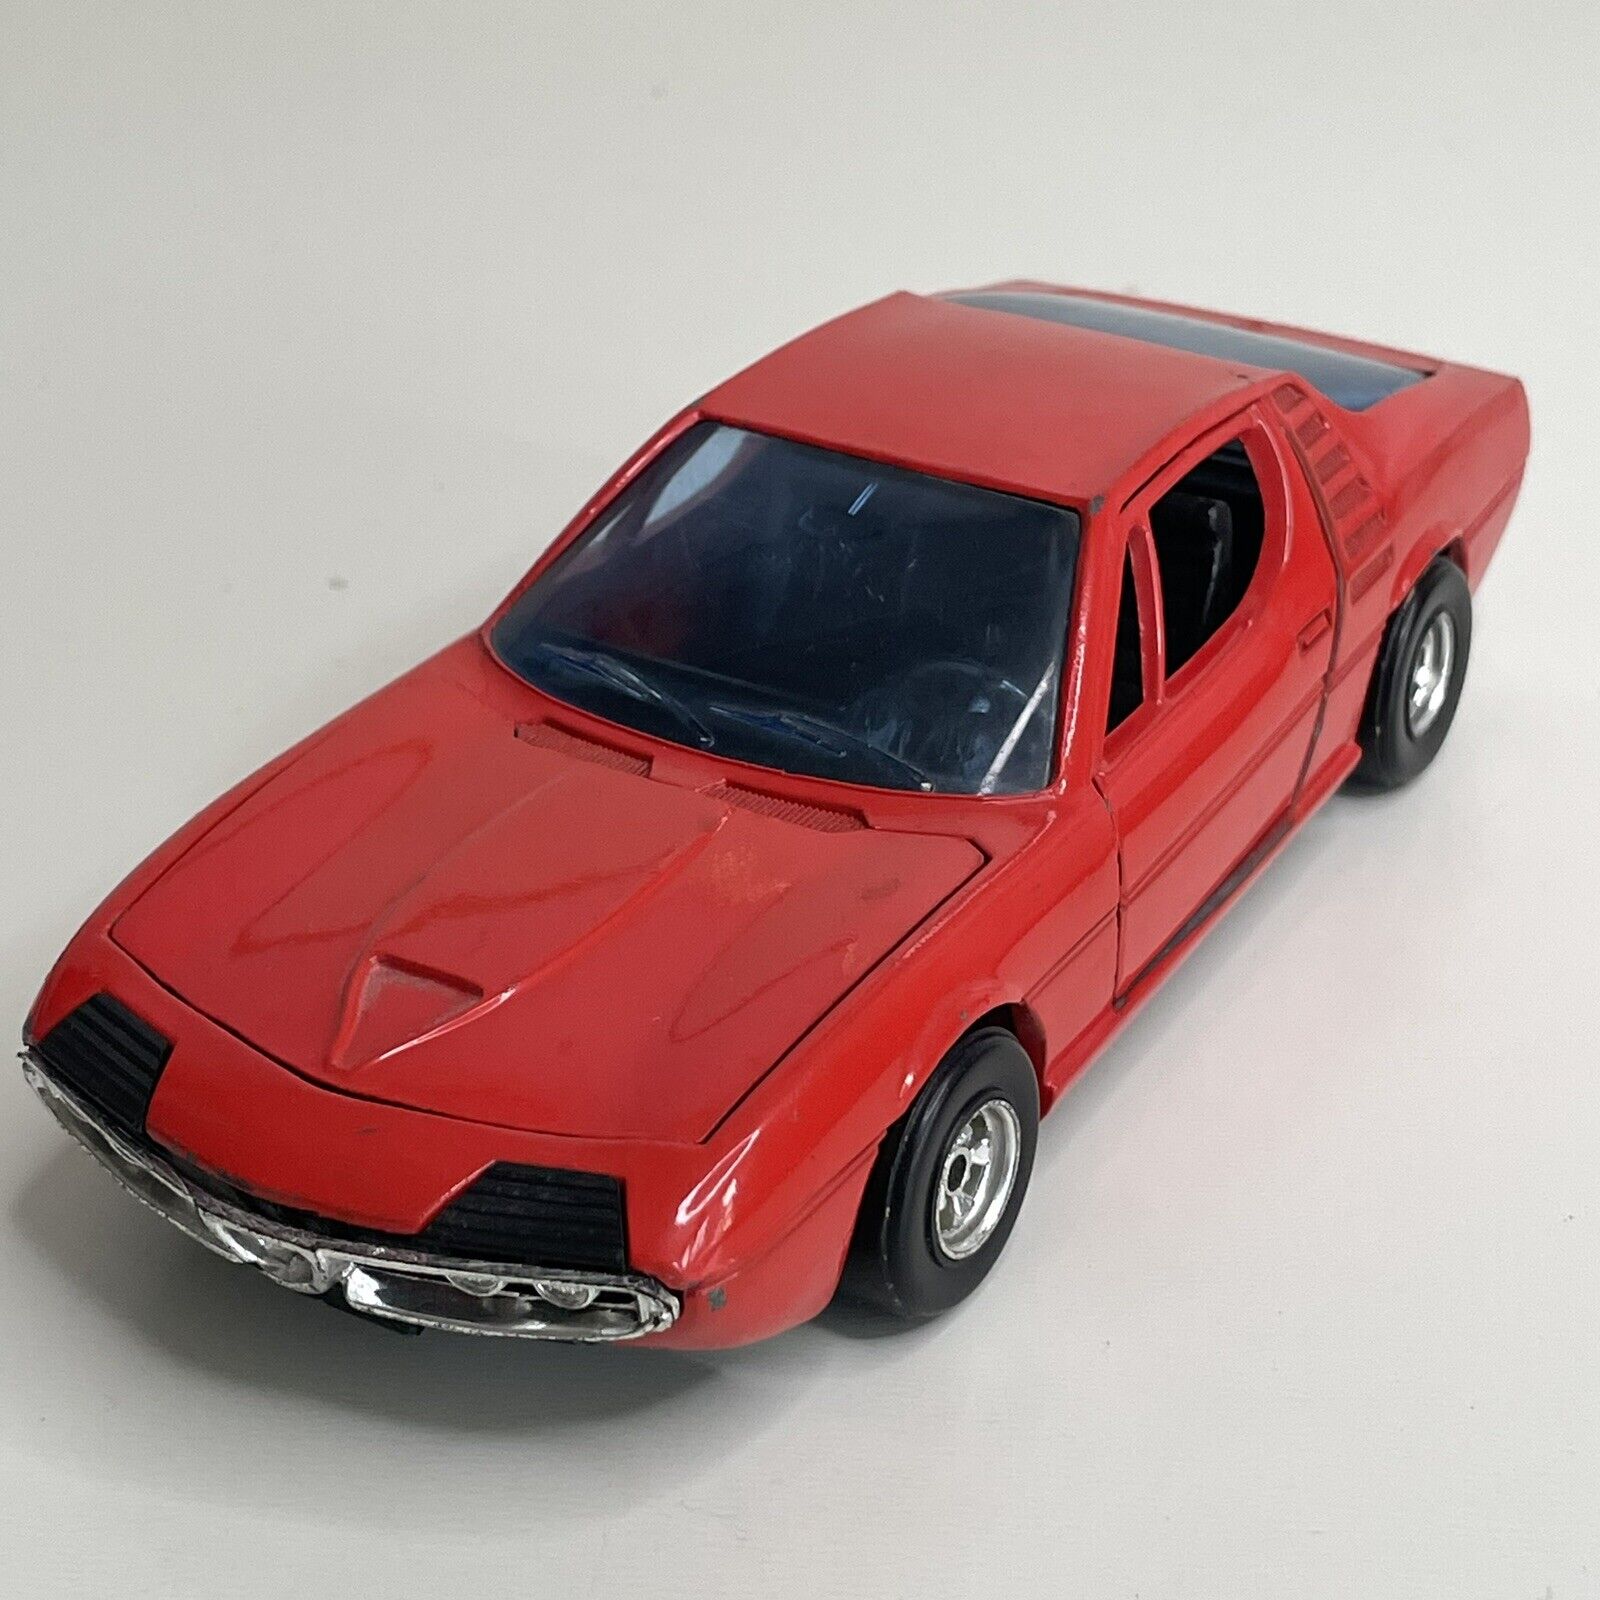 Politoys No. 6 Alfa Romeo Montreal made in Italy 1/25 scale Red Diecast Car